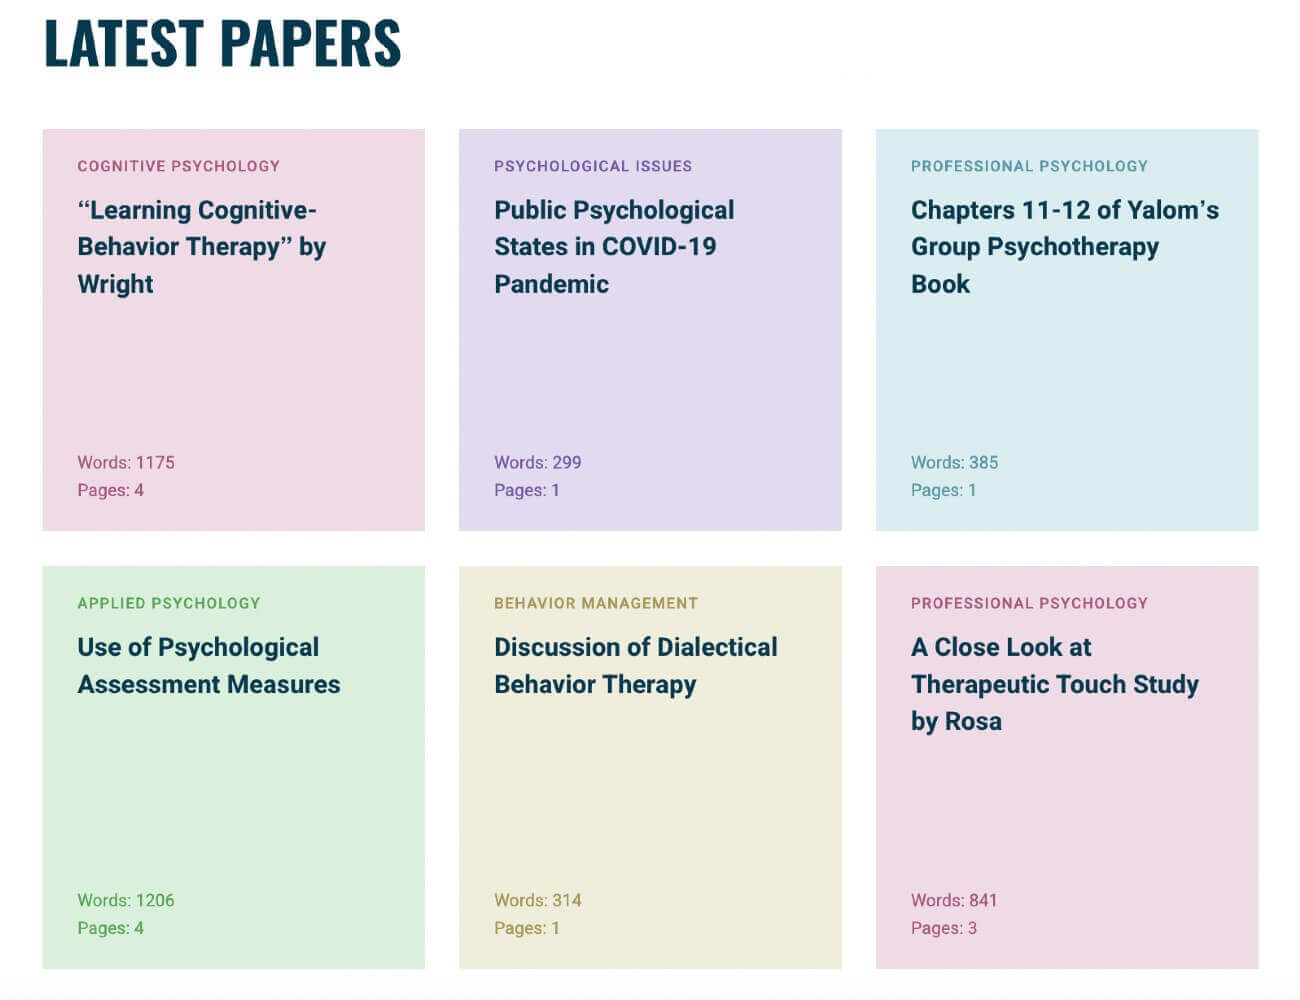 The picture contains some of the latest papers in Essay4Psychology database.